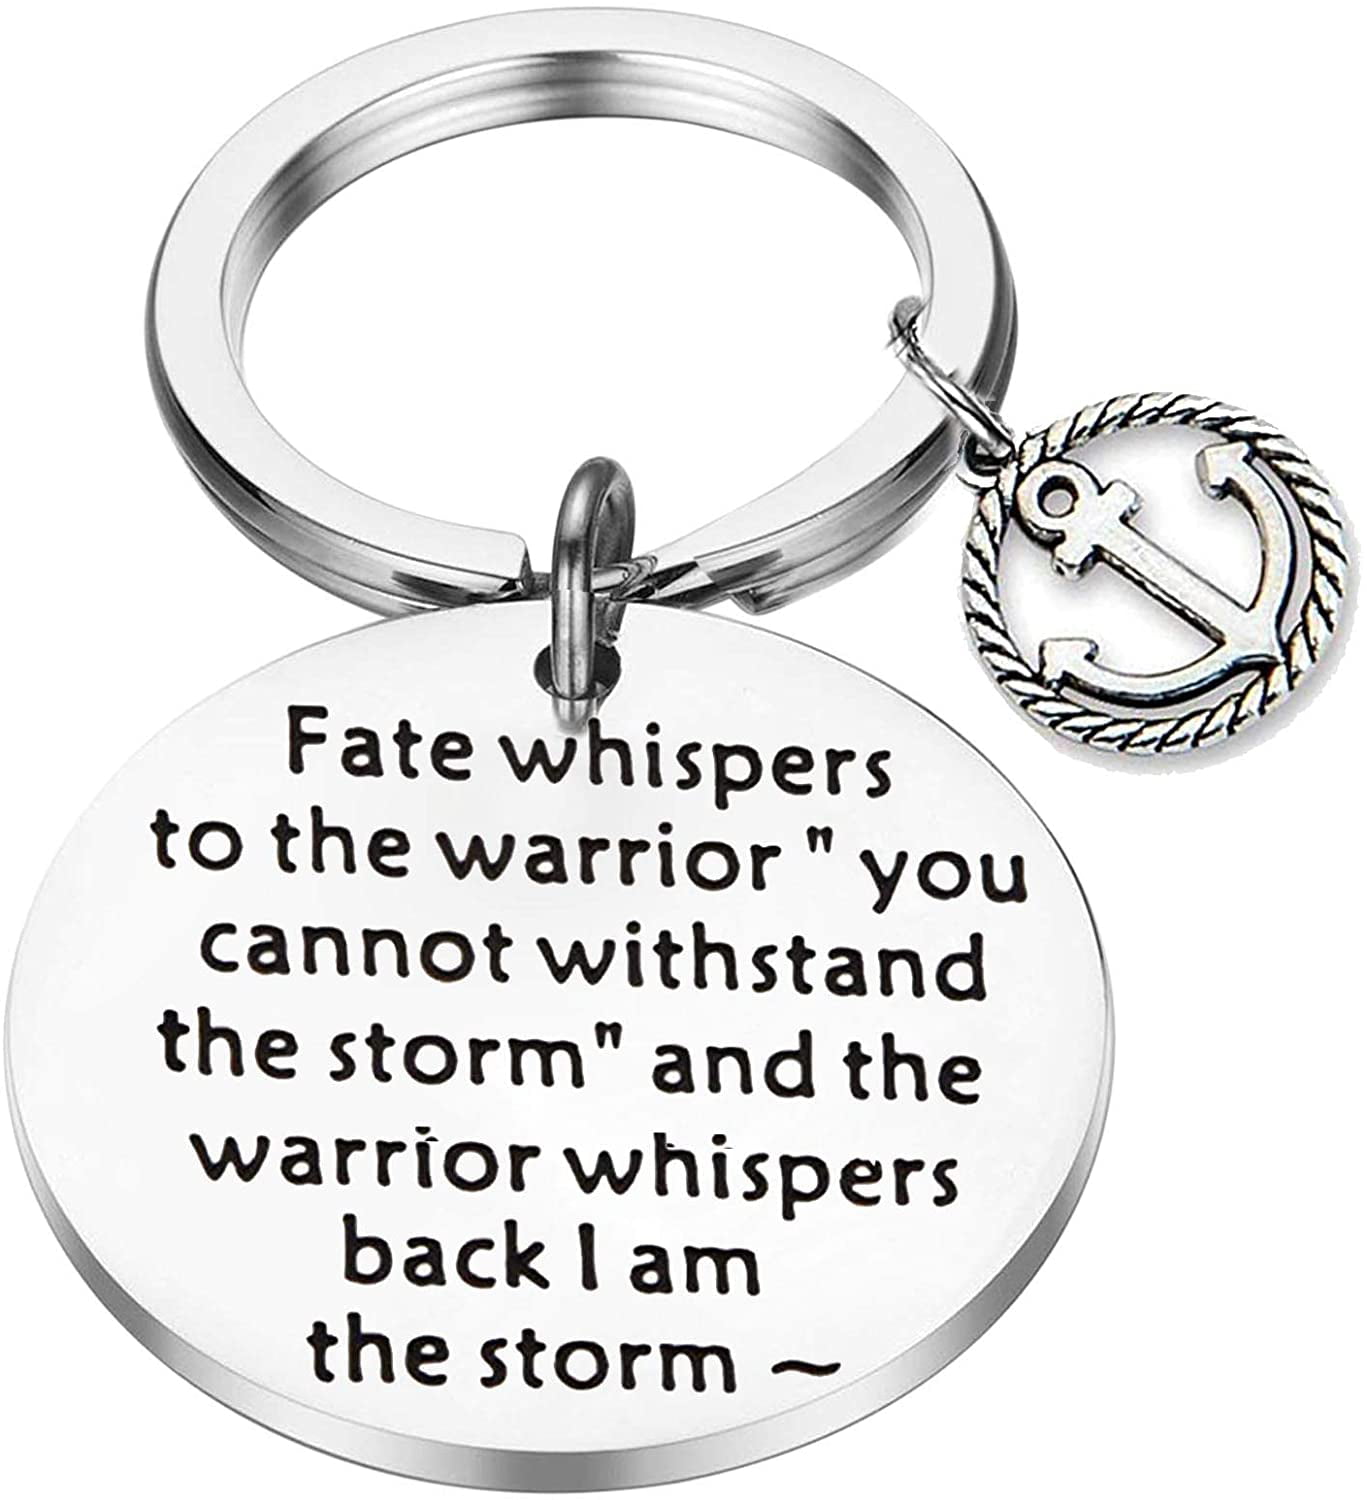 Inspirational Fate Whispers I am the Storm Warrior Quote Necklace 